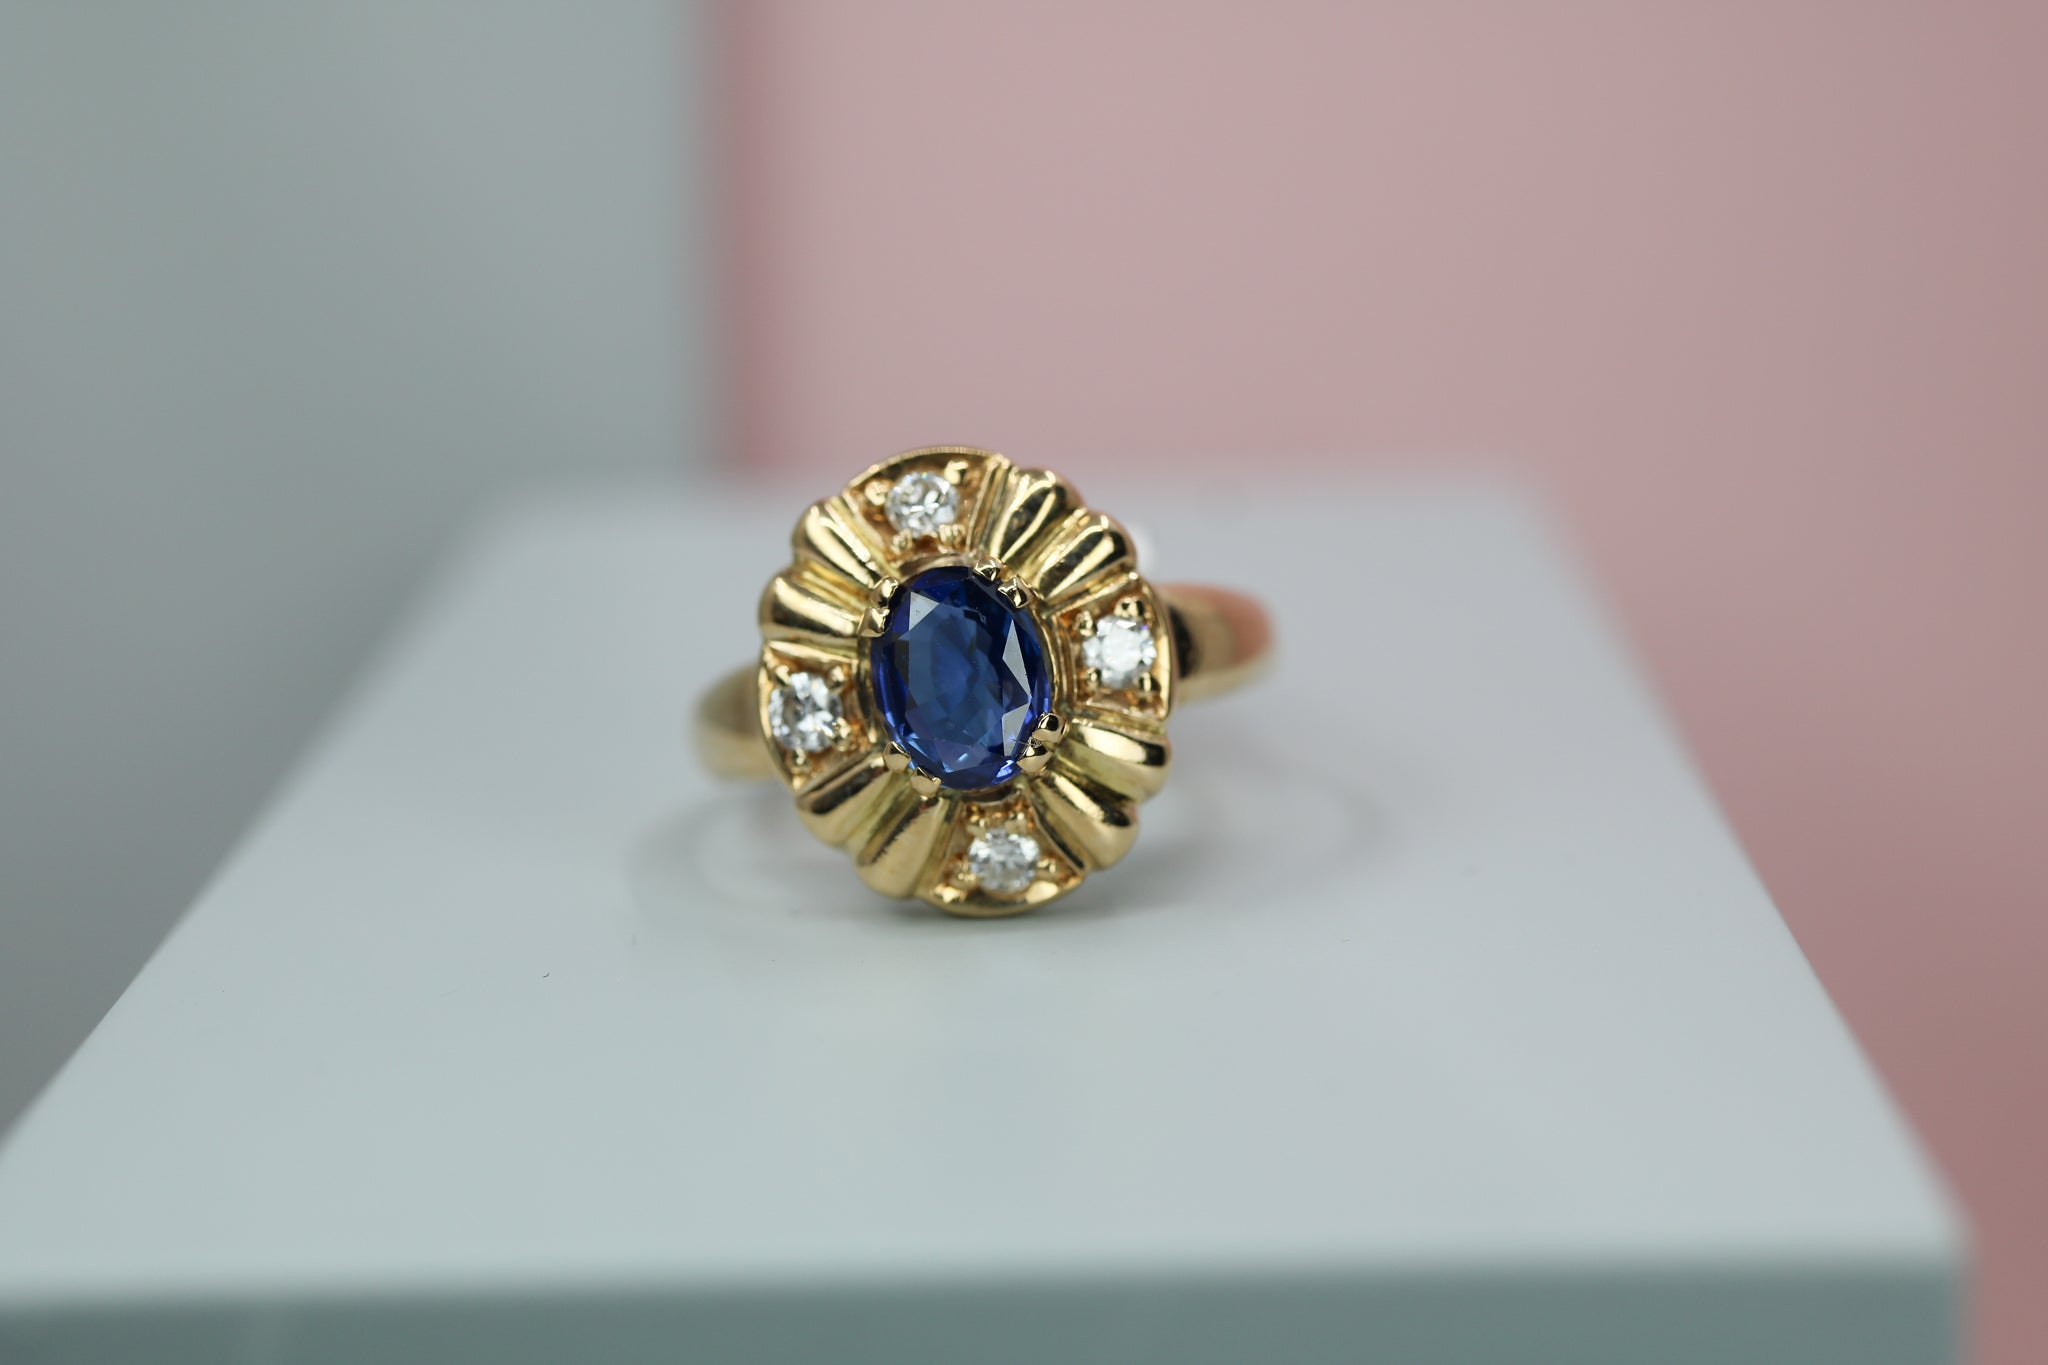 18ct Yellow Gold Sapphire & Diamond Ring - HJ2073 - Hallmark Jewellers Formby & The Jewellers Bench Widnes